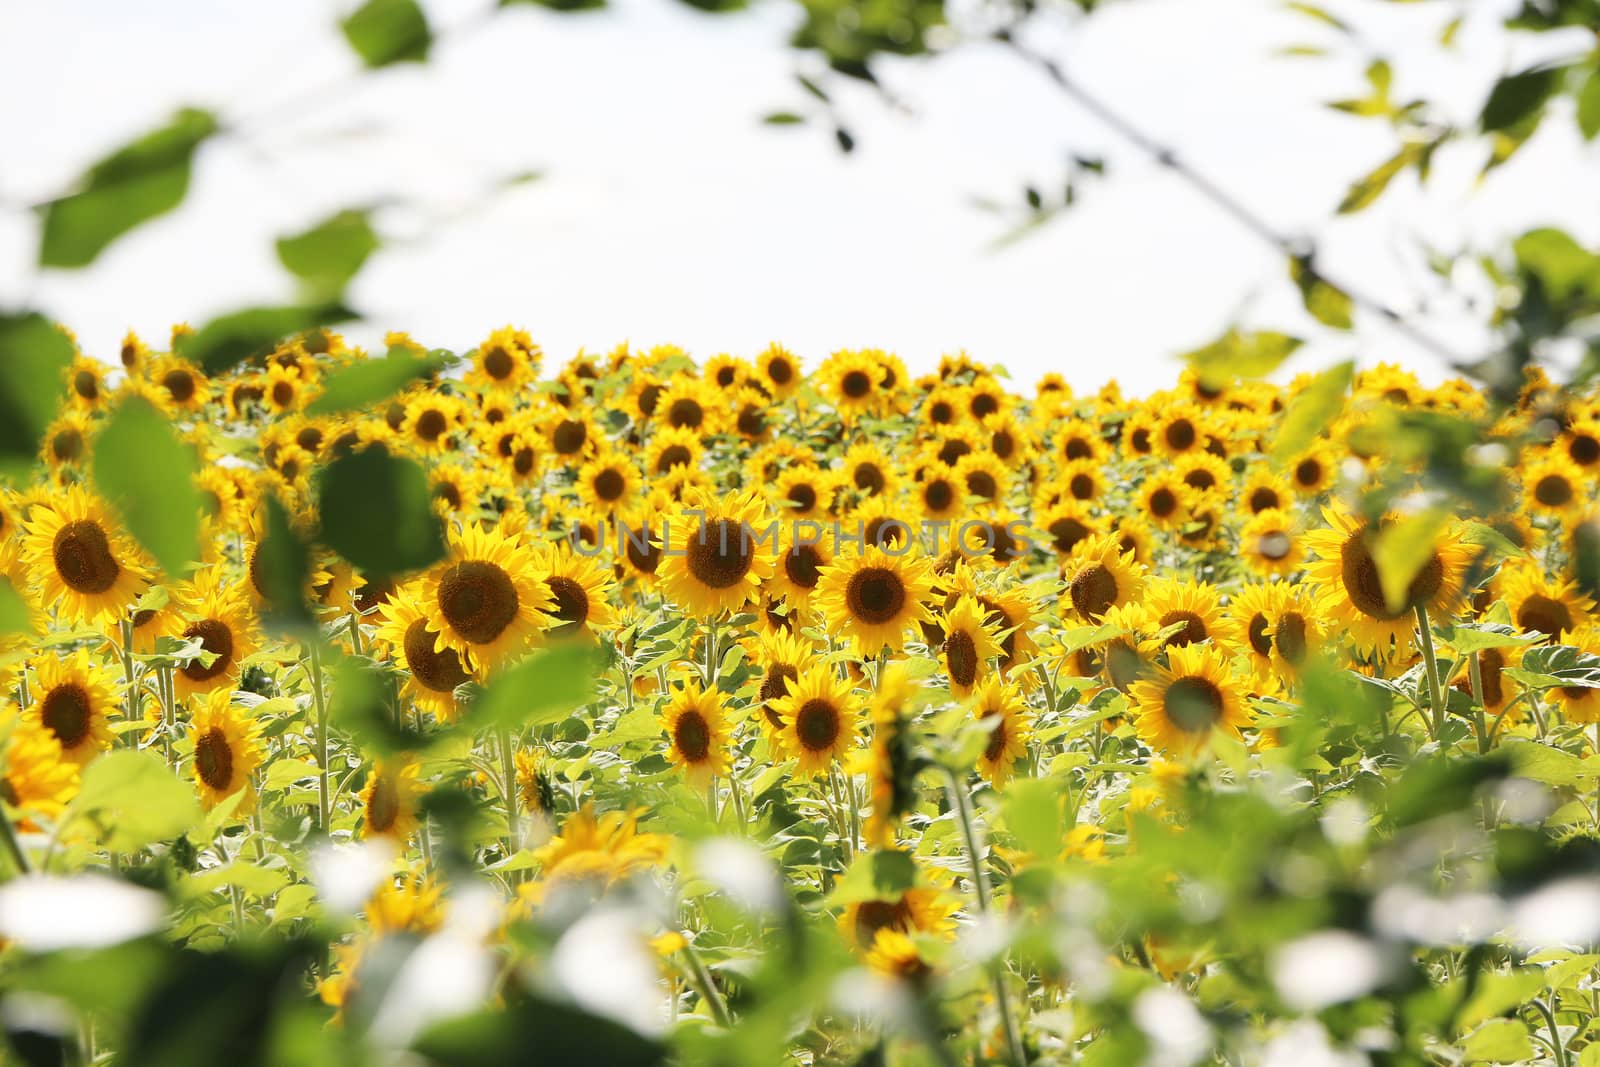 The field of sunflowers through a frame of trees branches